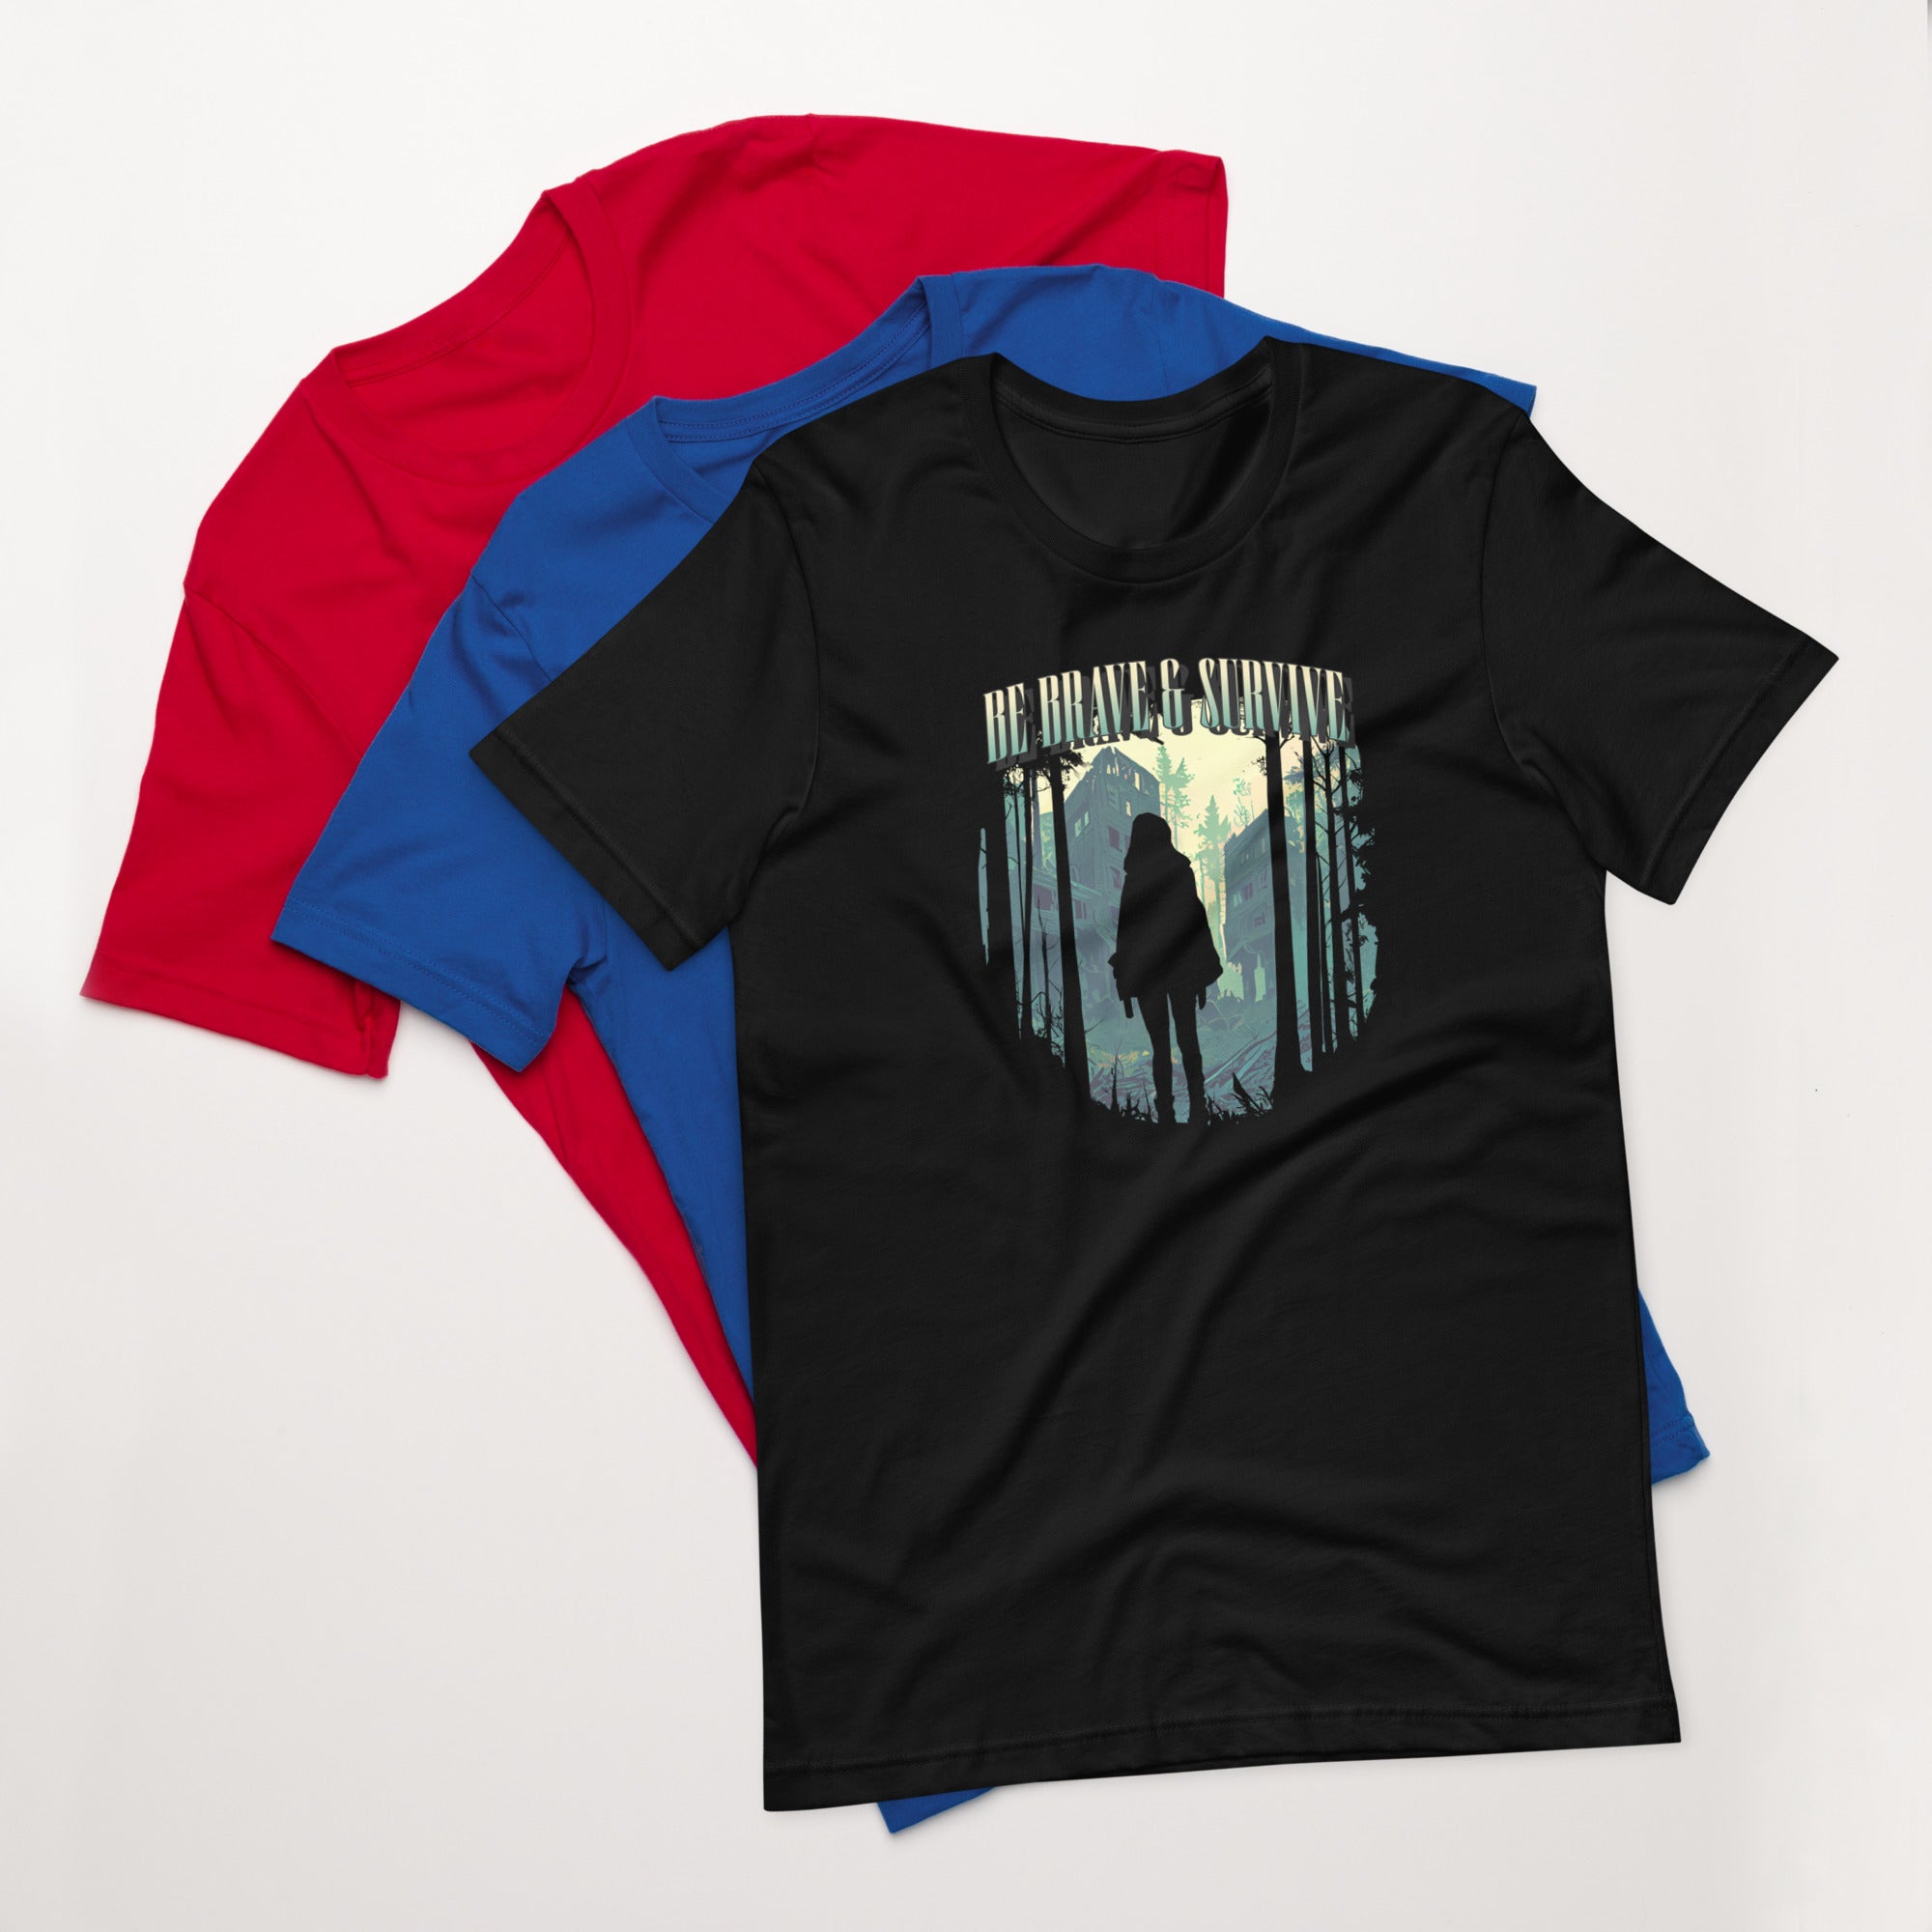 Be brave and survive - Men gamers t-shirt